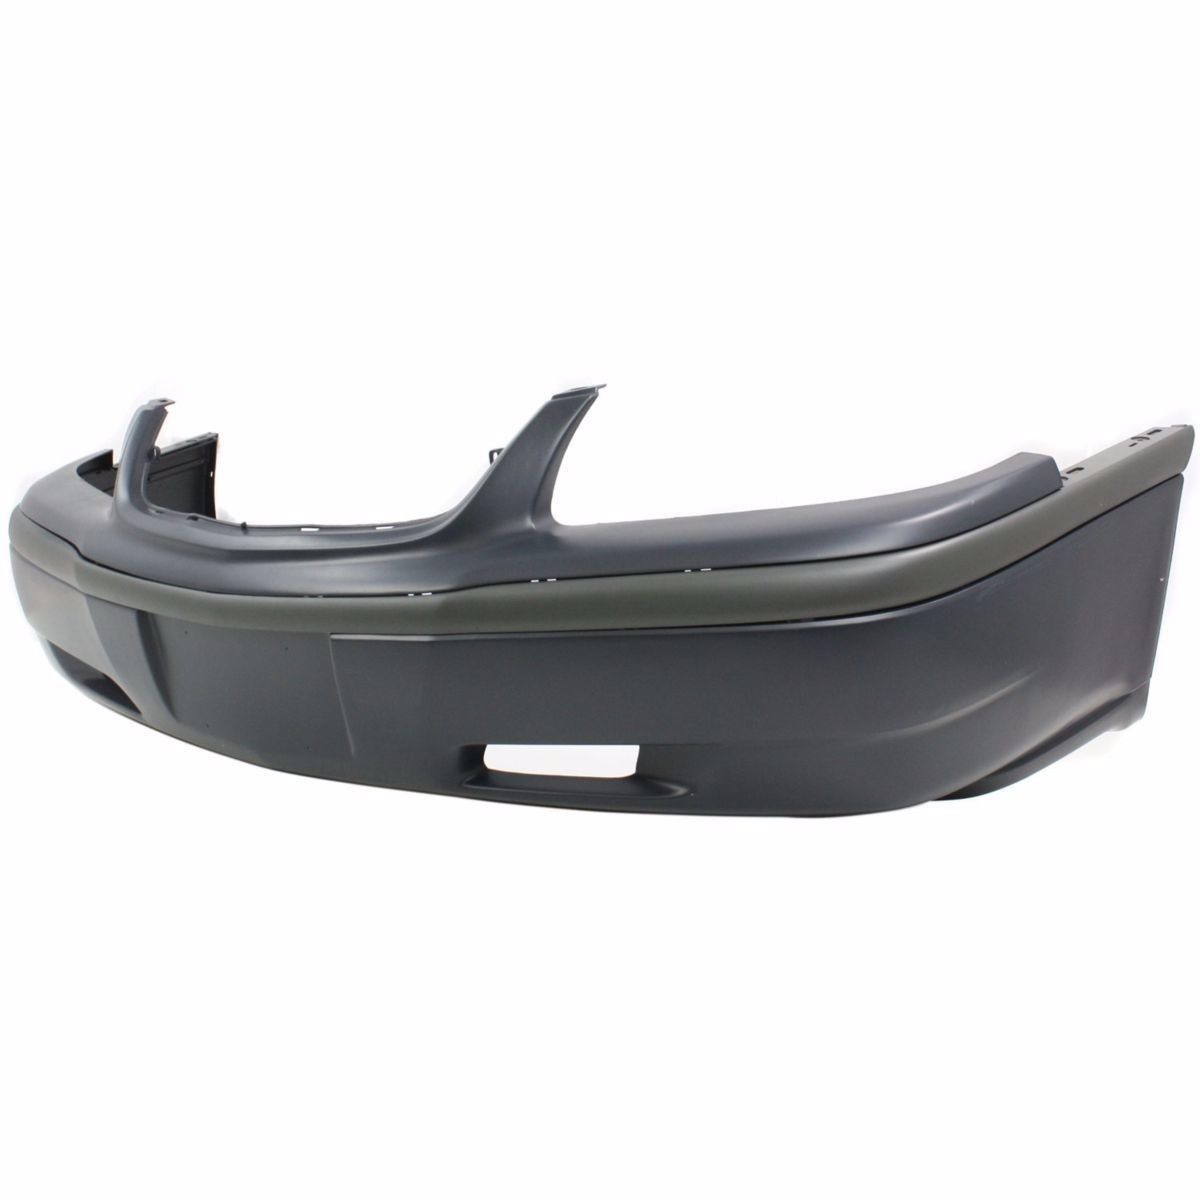 2000-2005 CHEVY IMPALA Front Bumper Cover base model  w/body side molding  w/o appearance package Painted to Match